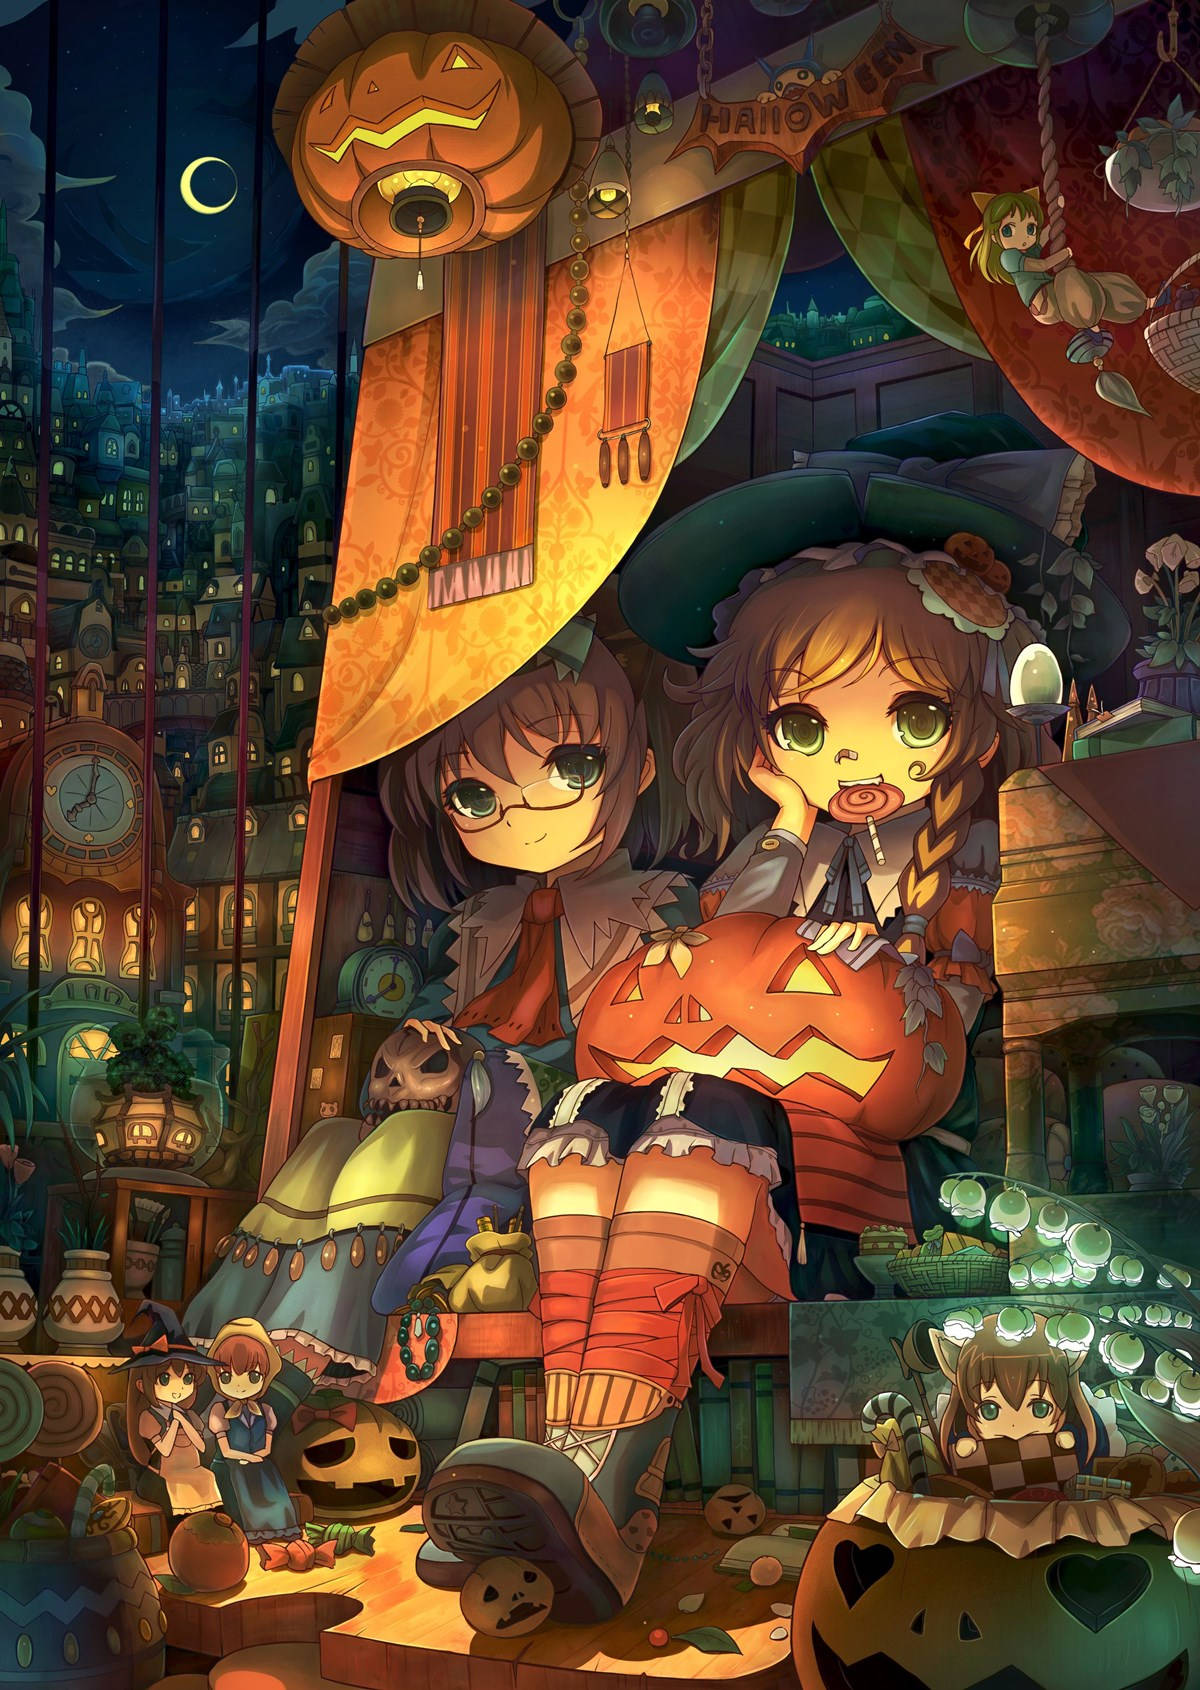 Trick or Treat! Celebrate Halloween with your favorite Anime characters Wallpaper